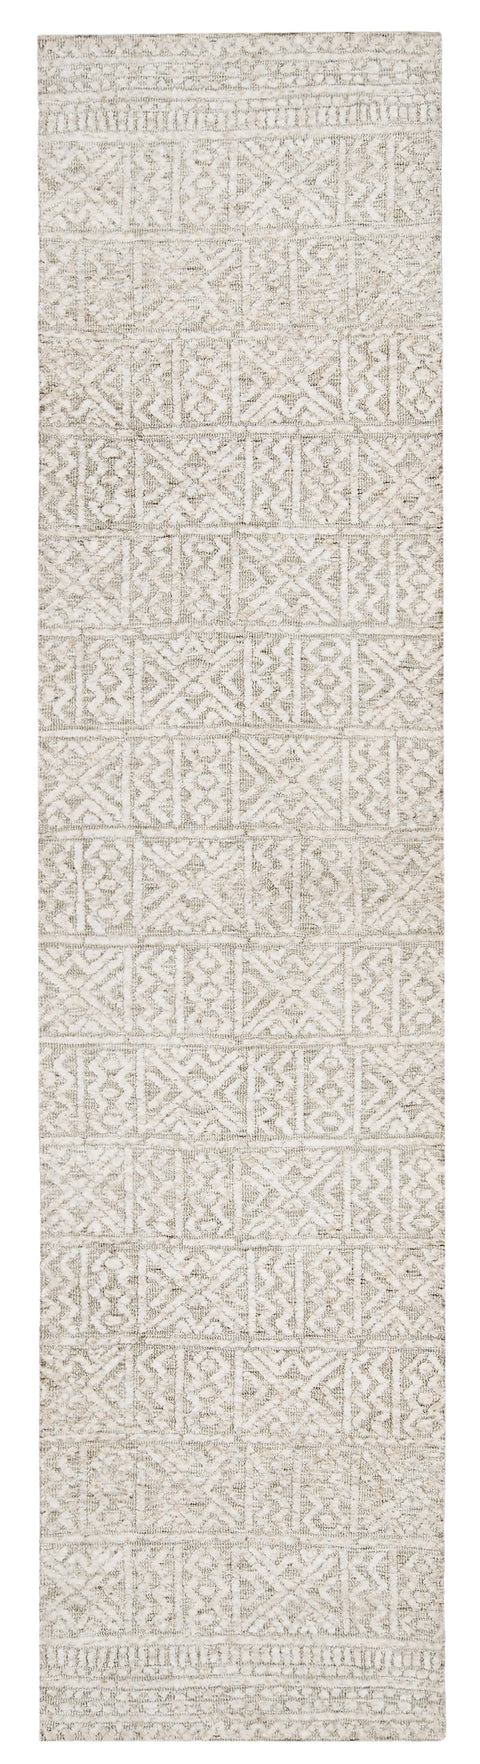 Melia Grey and Ivory Tribal Textured Runner Rug